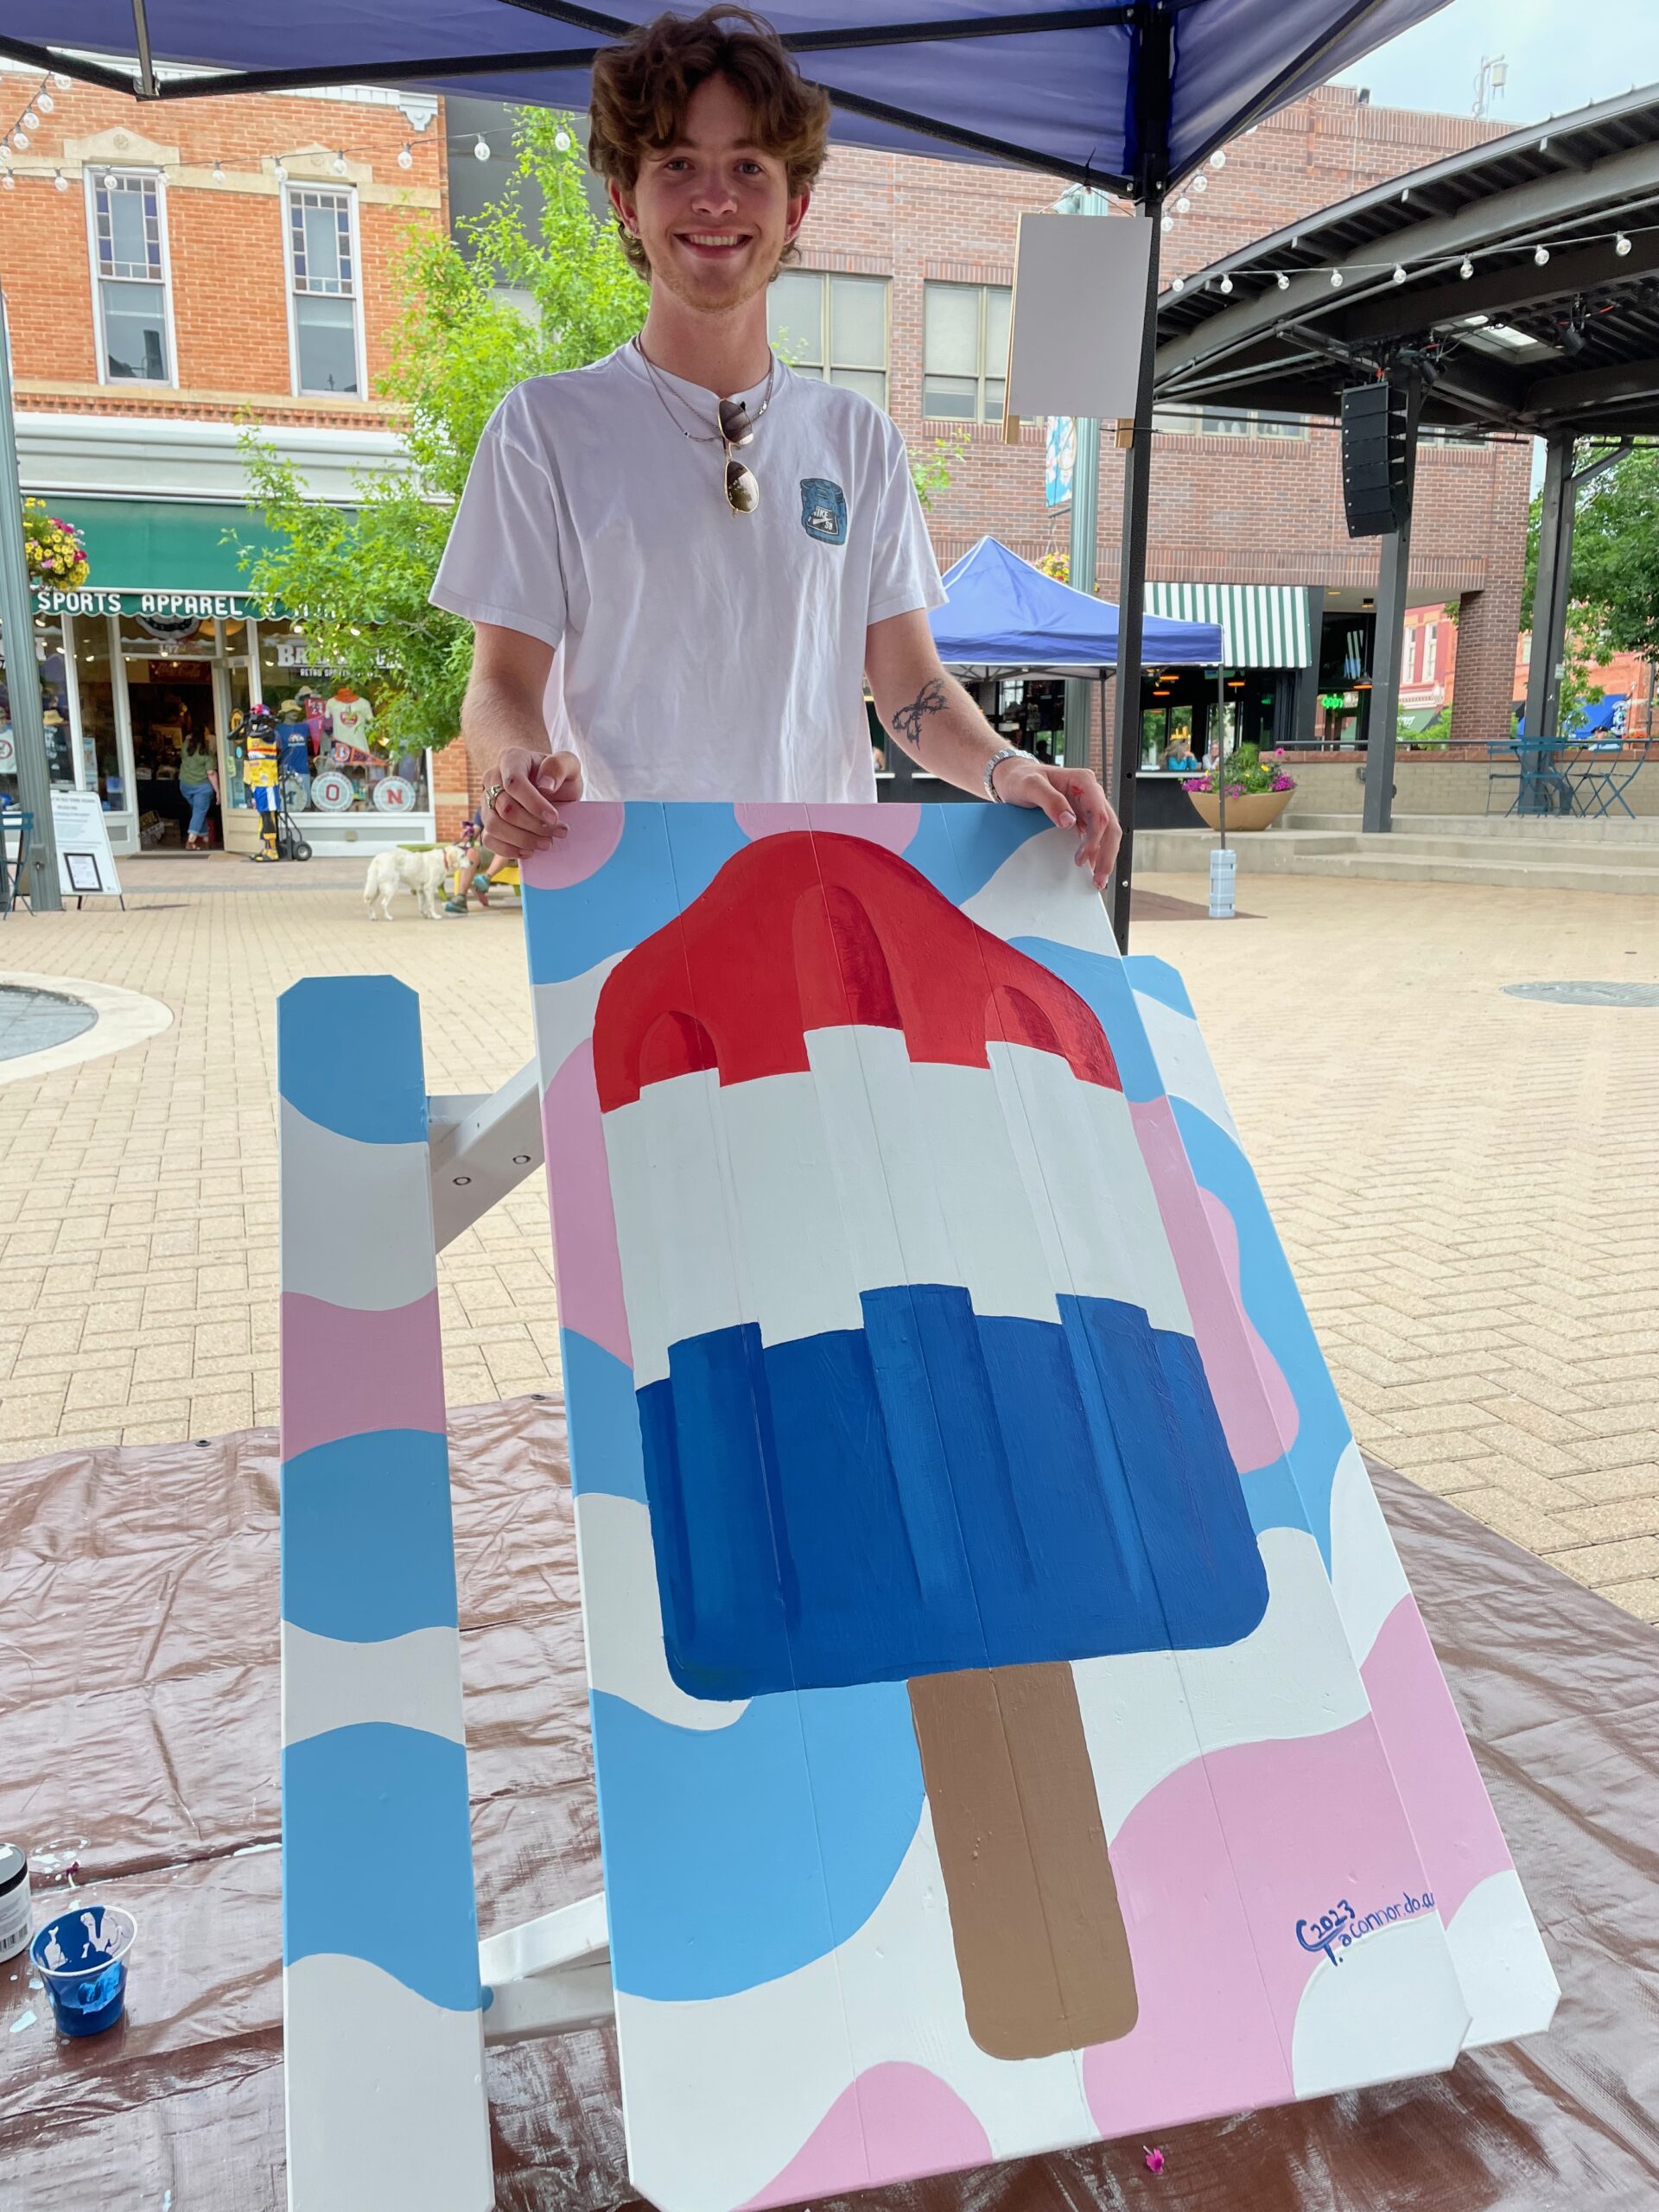 Man showcasing painted Adirondack table with a patriotic popsicle painting